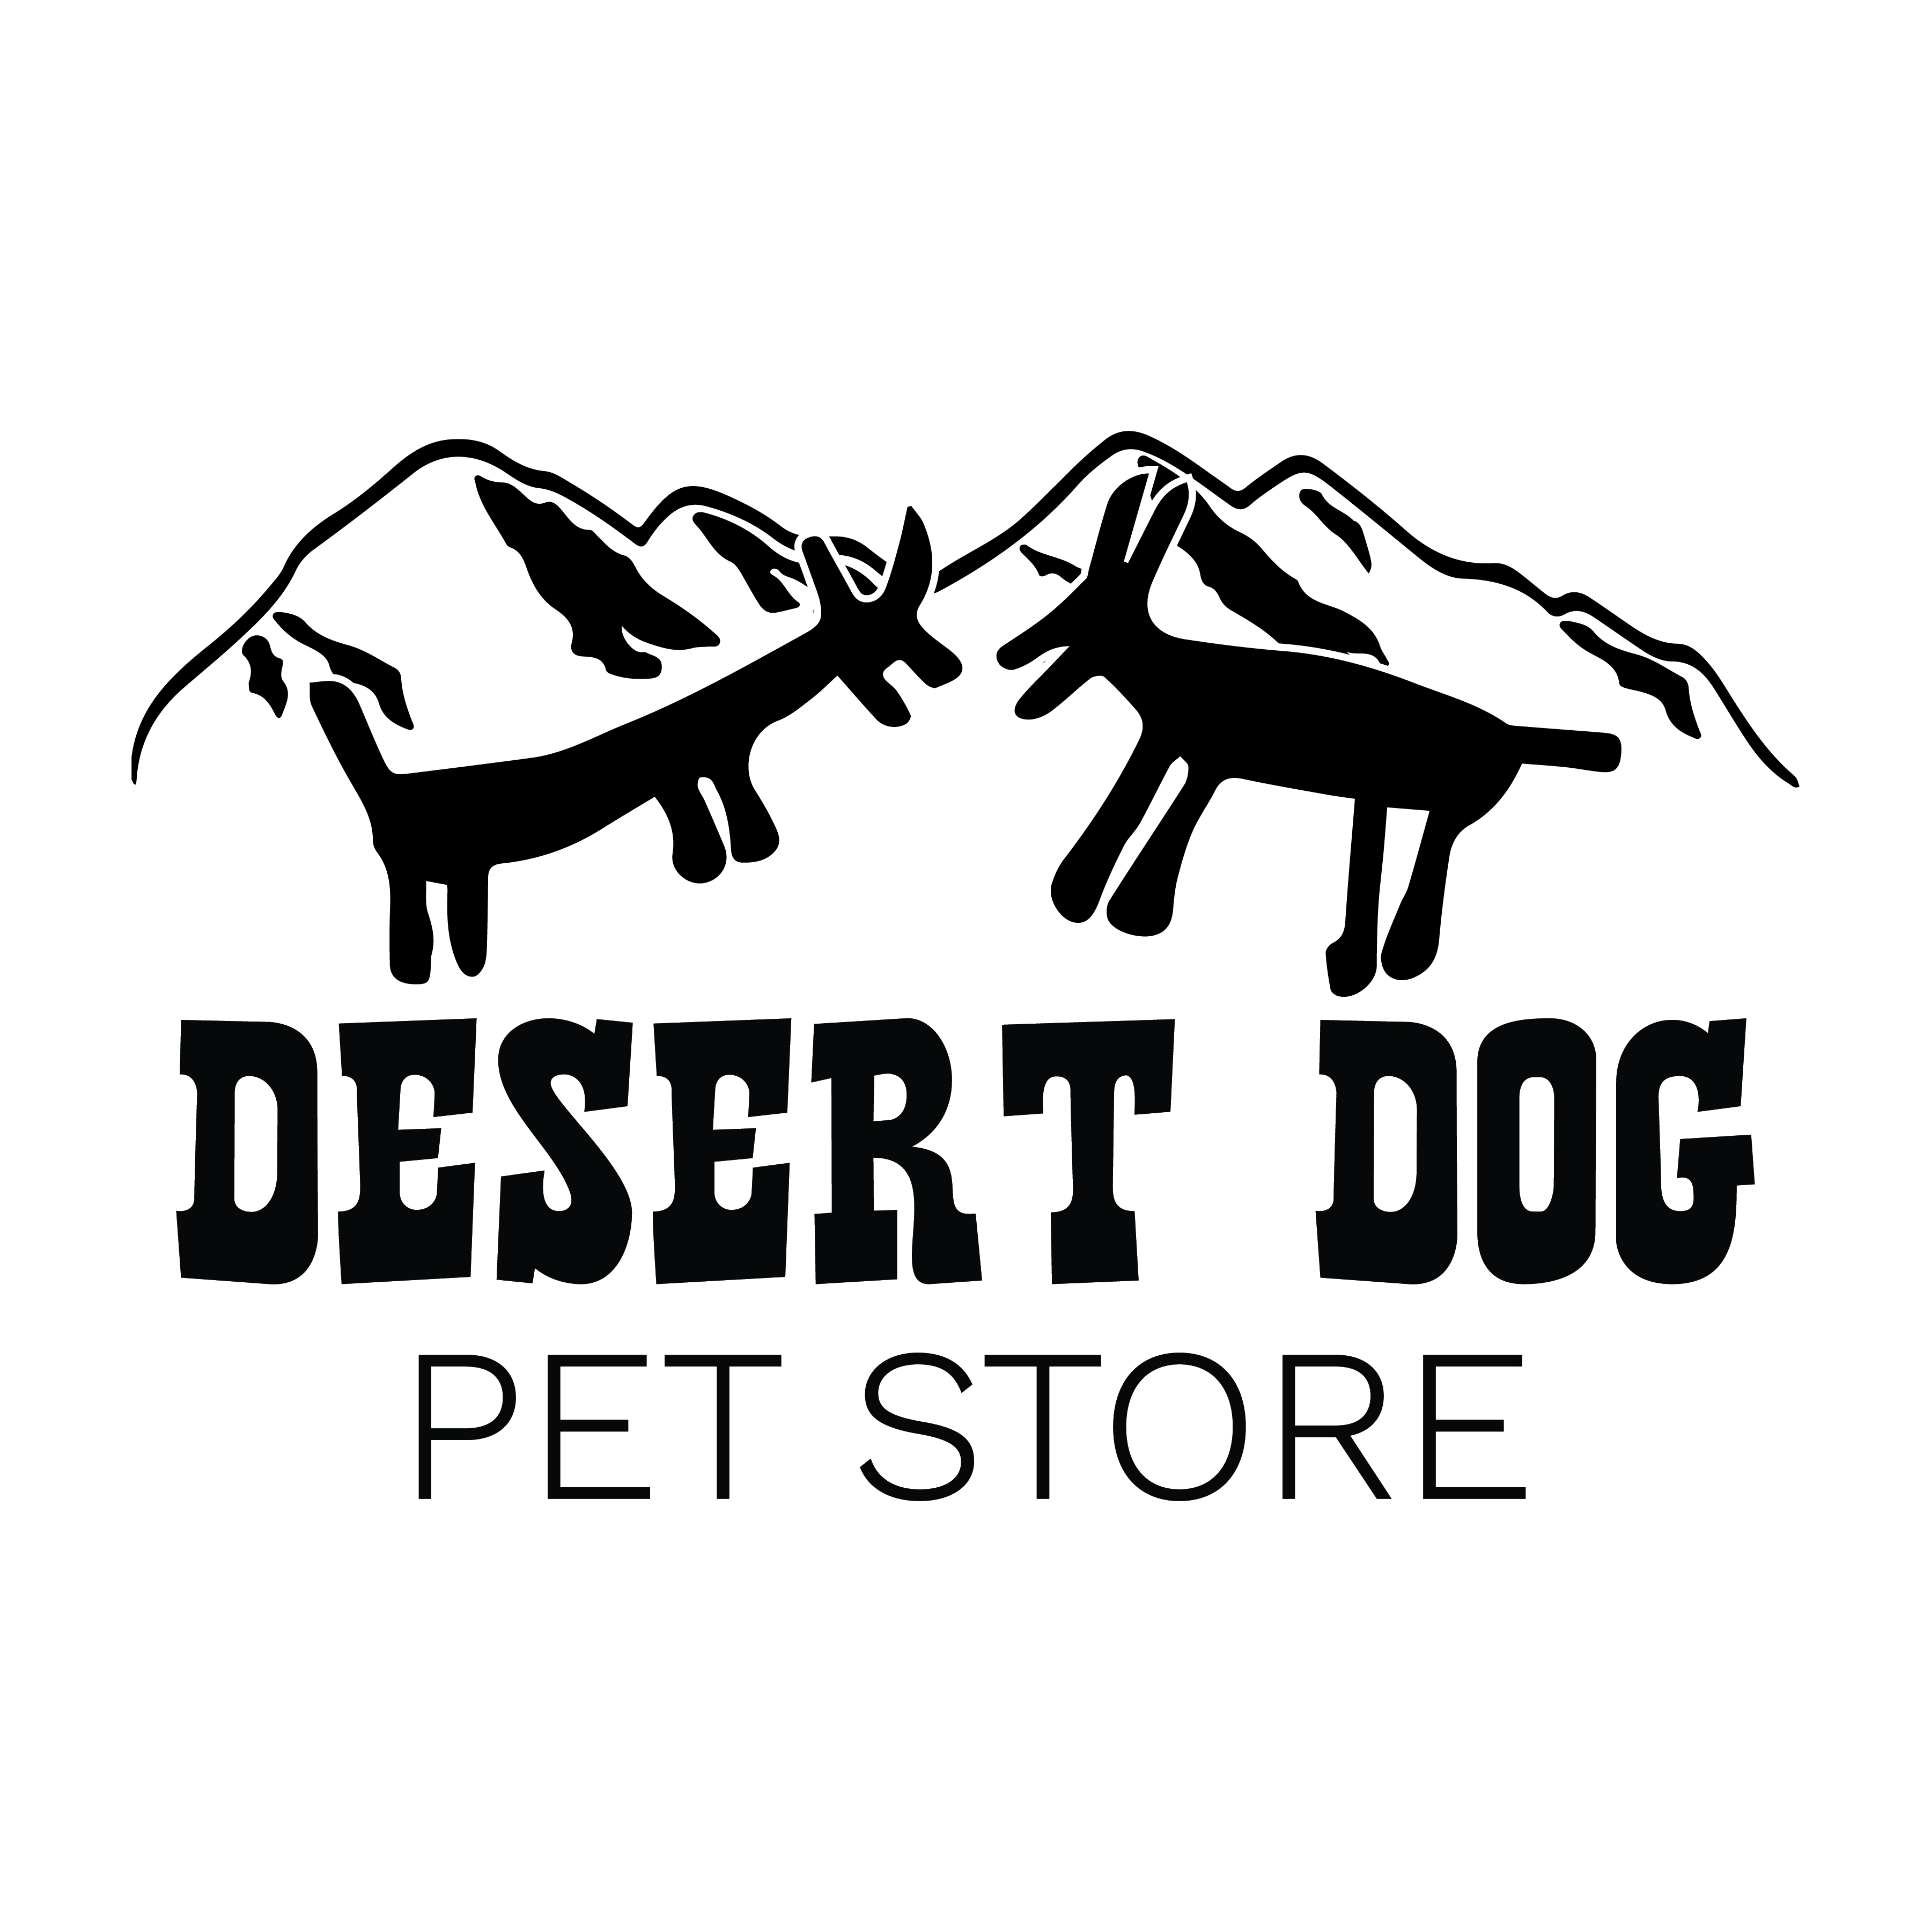 Welcome to DESERT DOG PET STORE